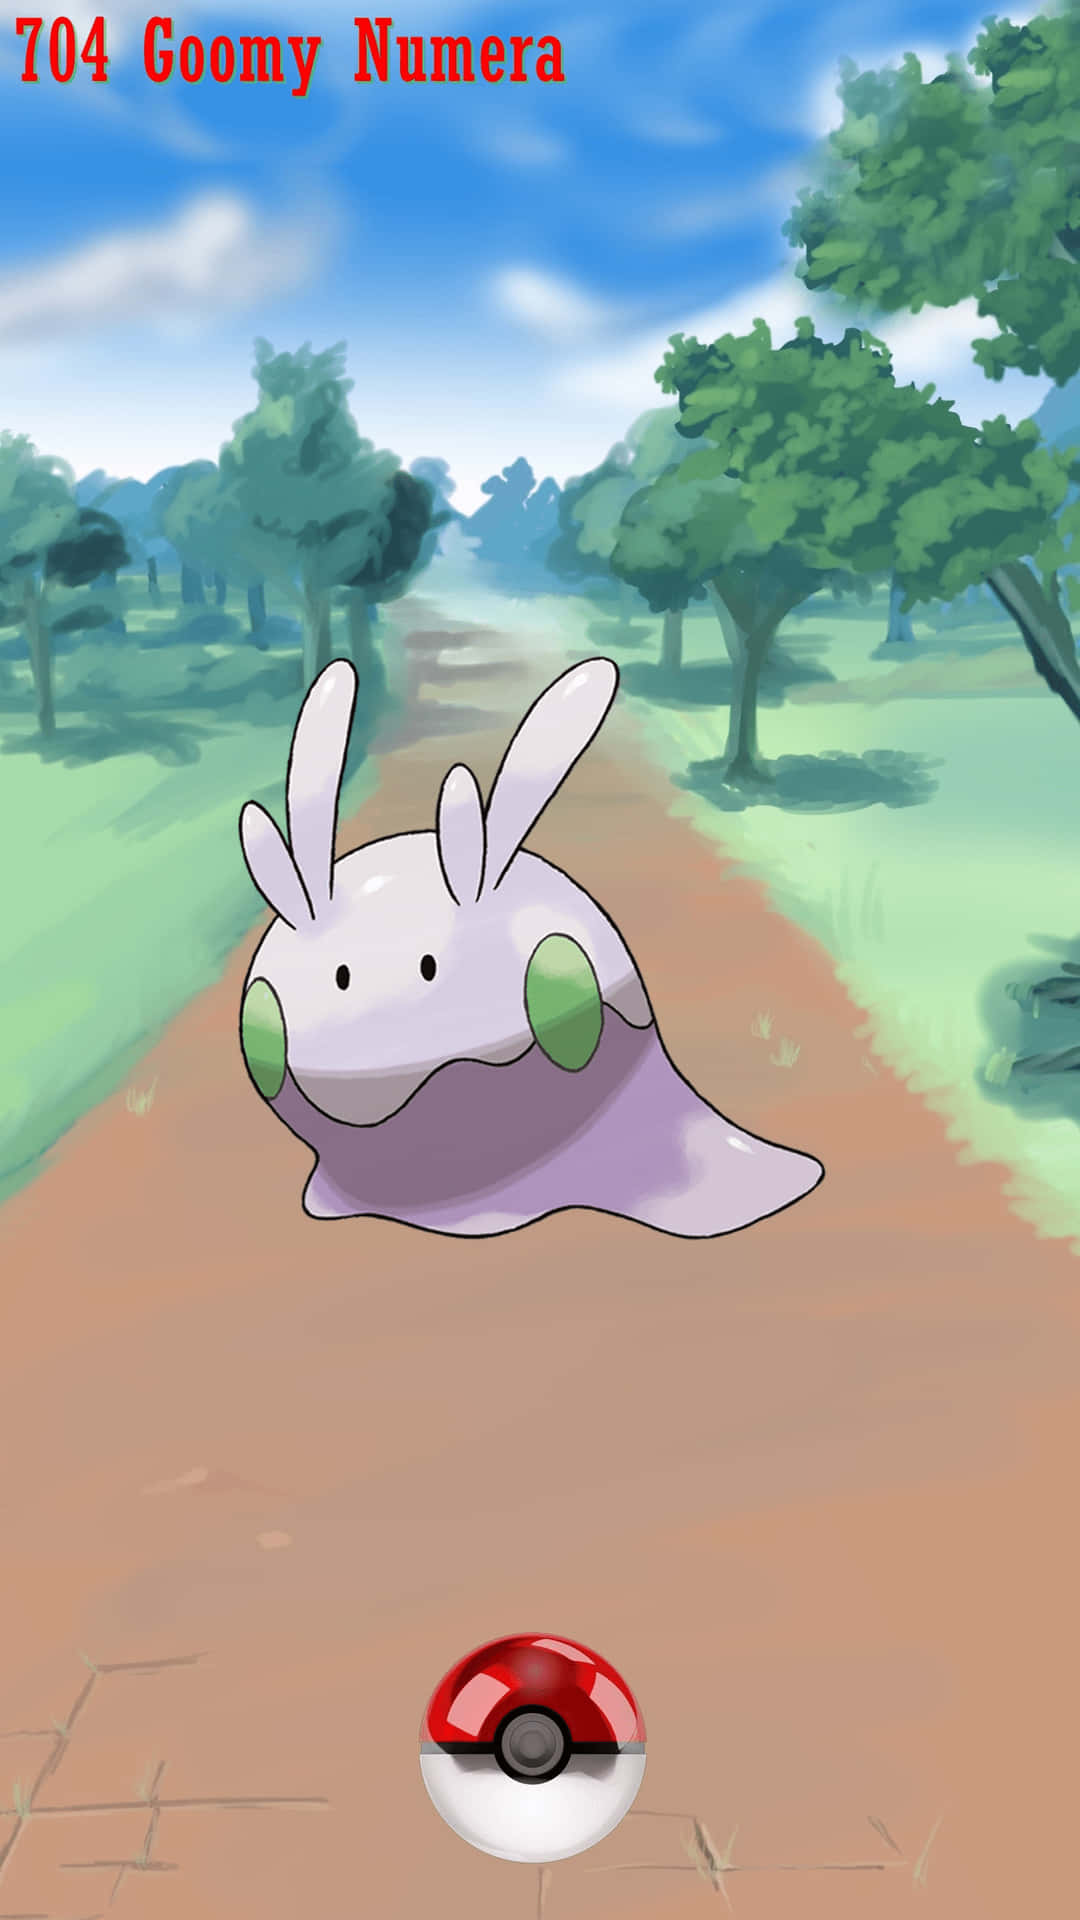 1. Image  A Goomy Gently Nestled in Its Poke Ball Wallpaper